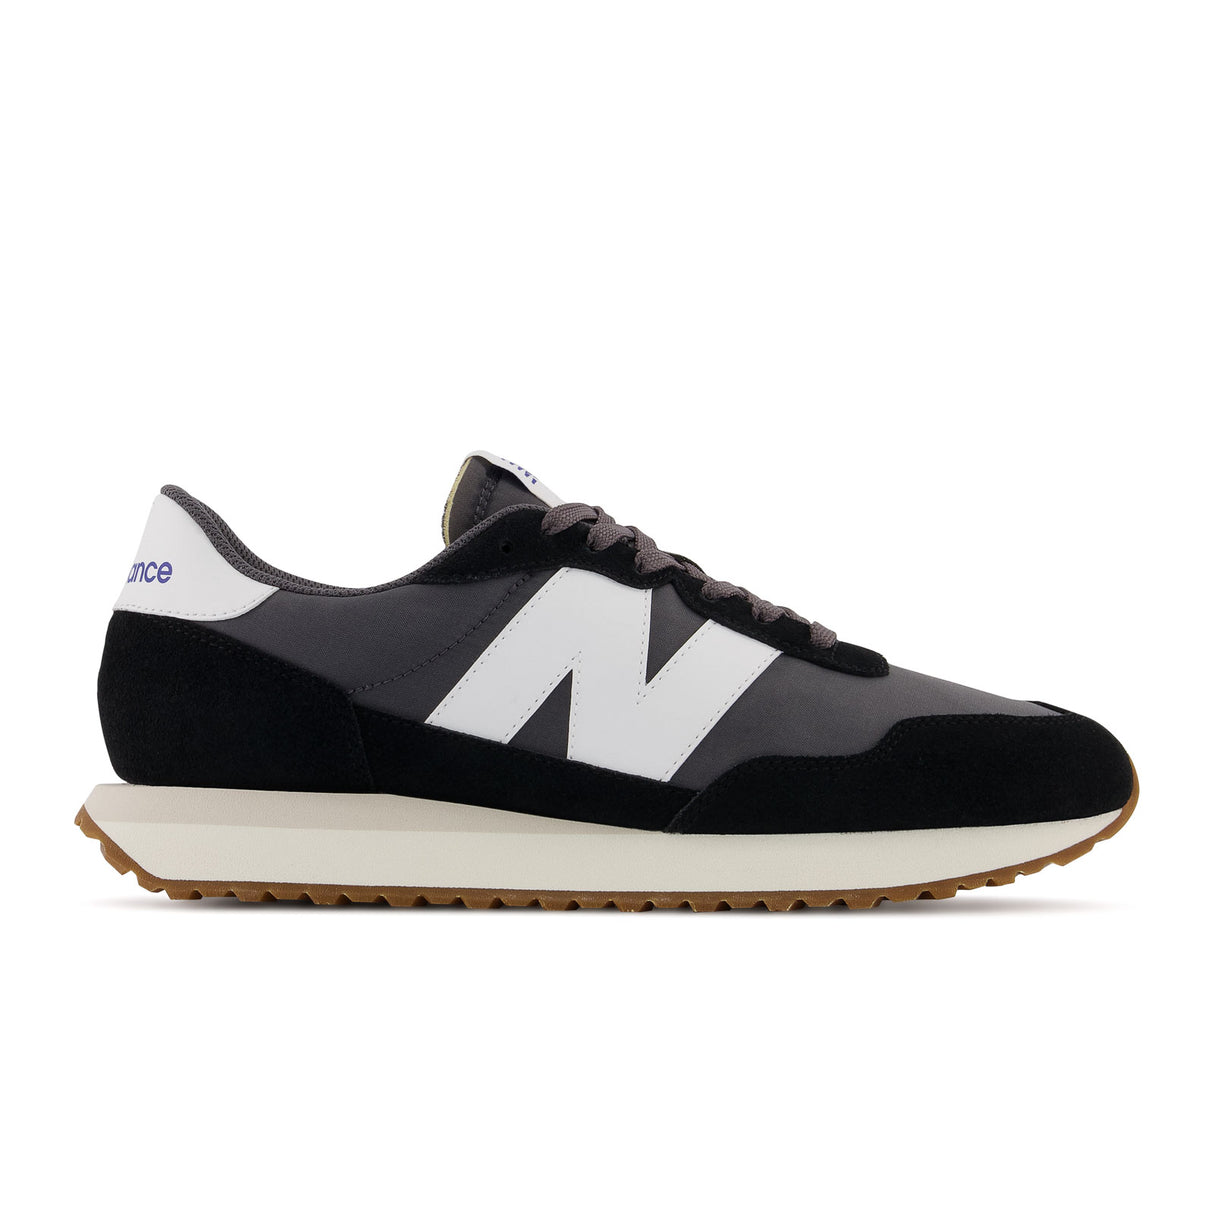 New Balance 237 v1 Sneaker (Men) - Black/Magnet Athletic - Casual - Lace Up - The Heel Shoe Fitters